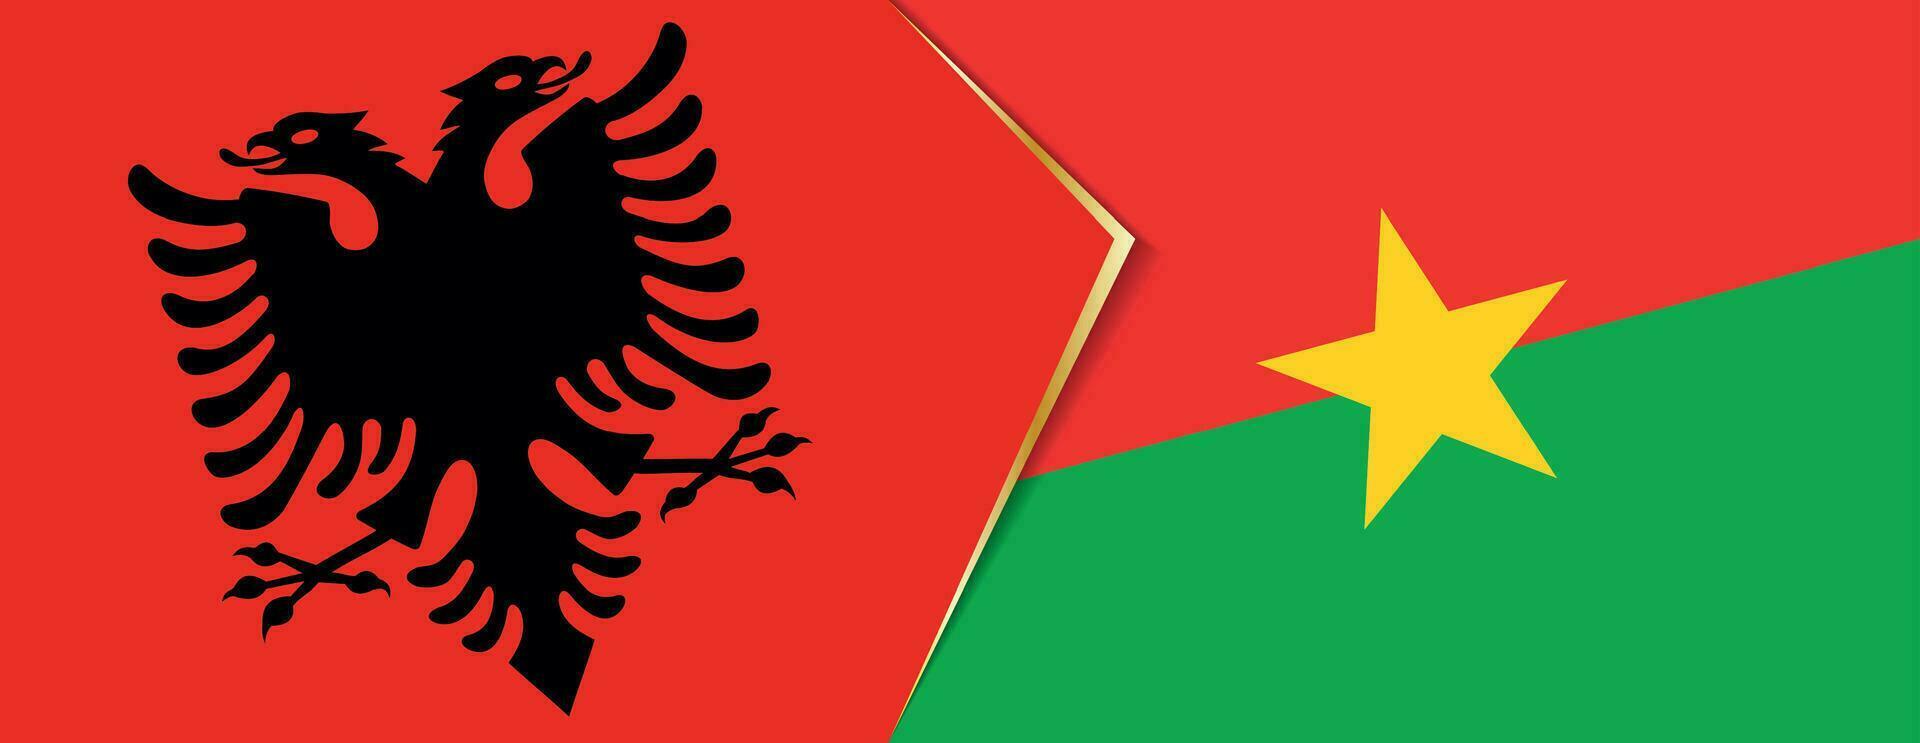 Albania and Burkina Faso flags, two vector flags.